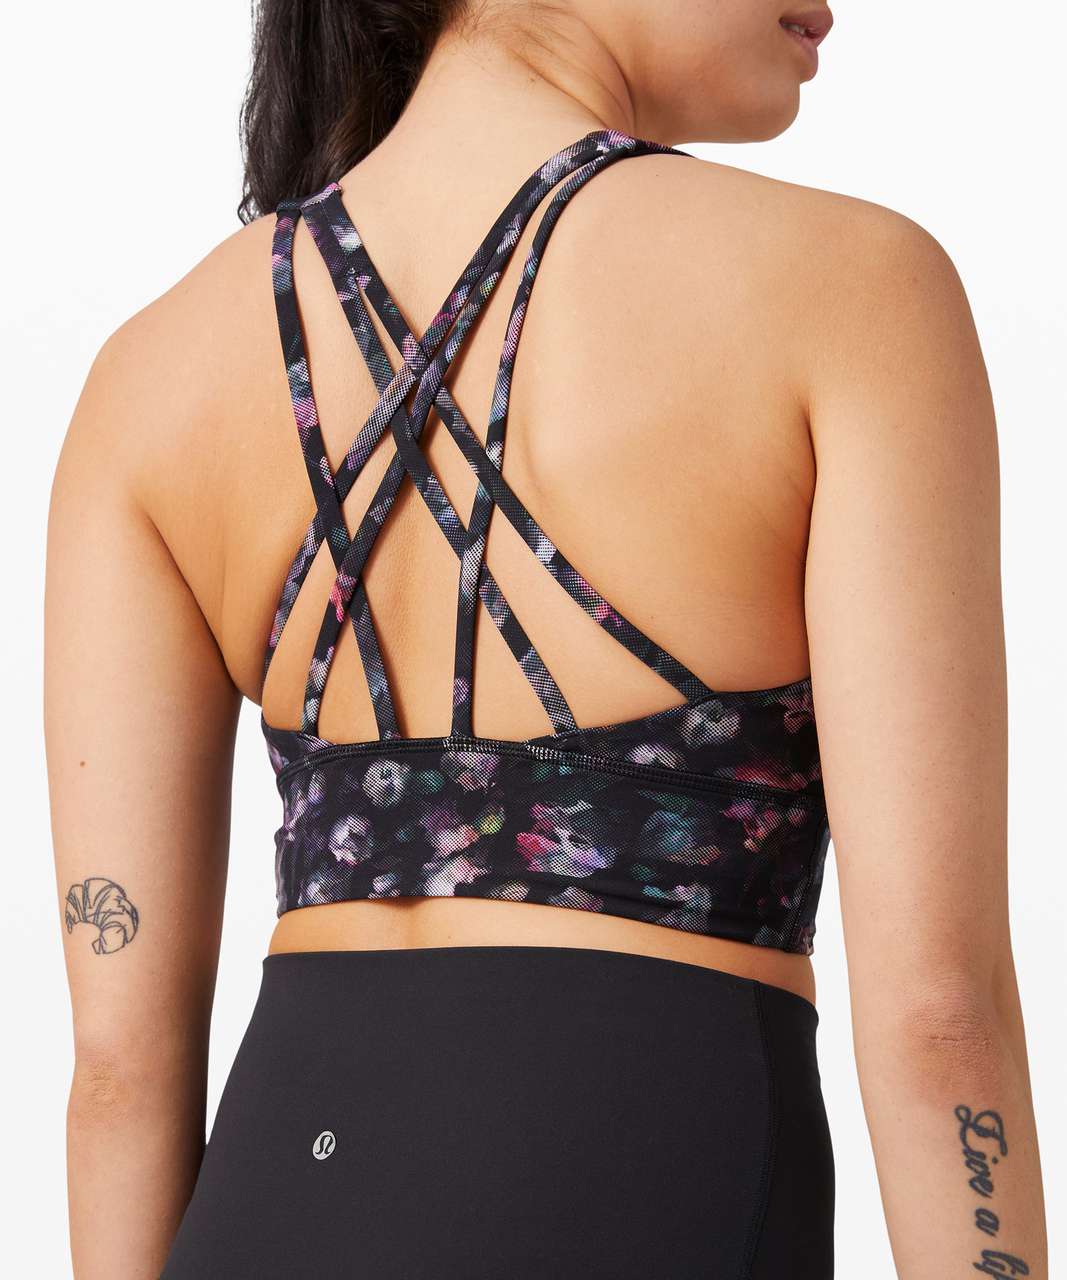 Lululemon Free To Be Serene Bra Long Line *Light Support, C/D Cup (Online Only) - Activate Floral Multi